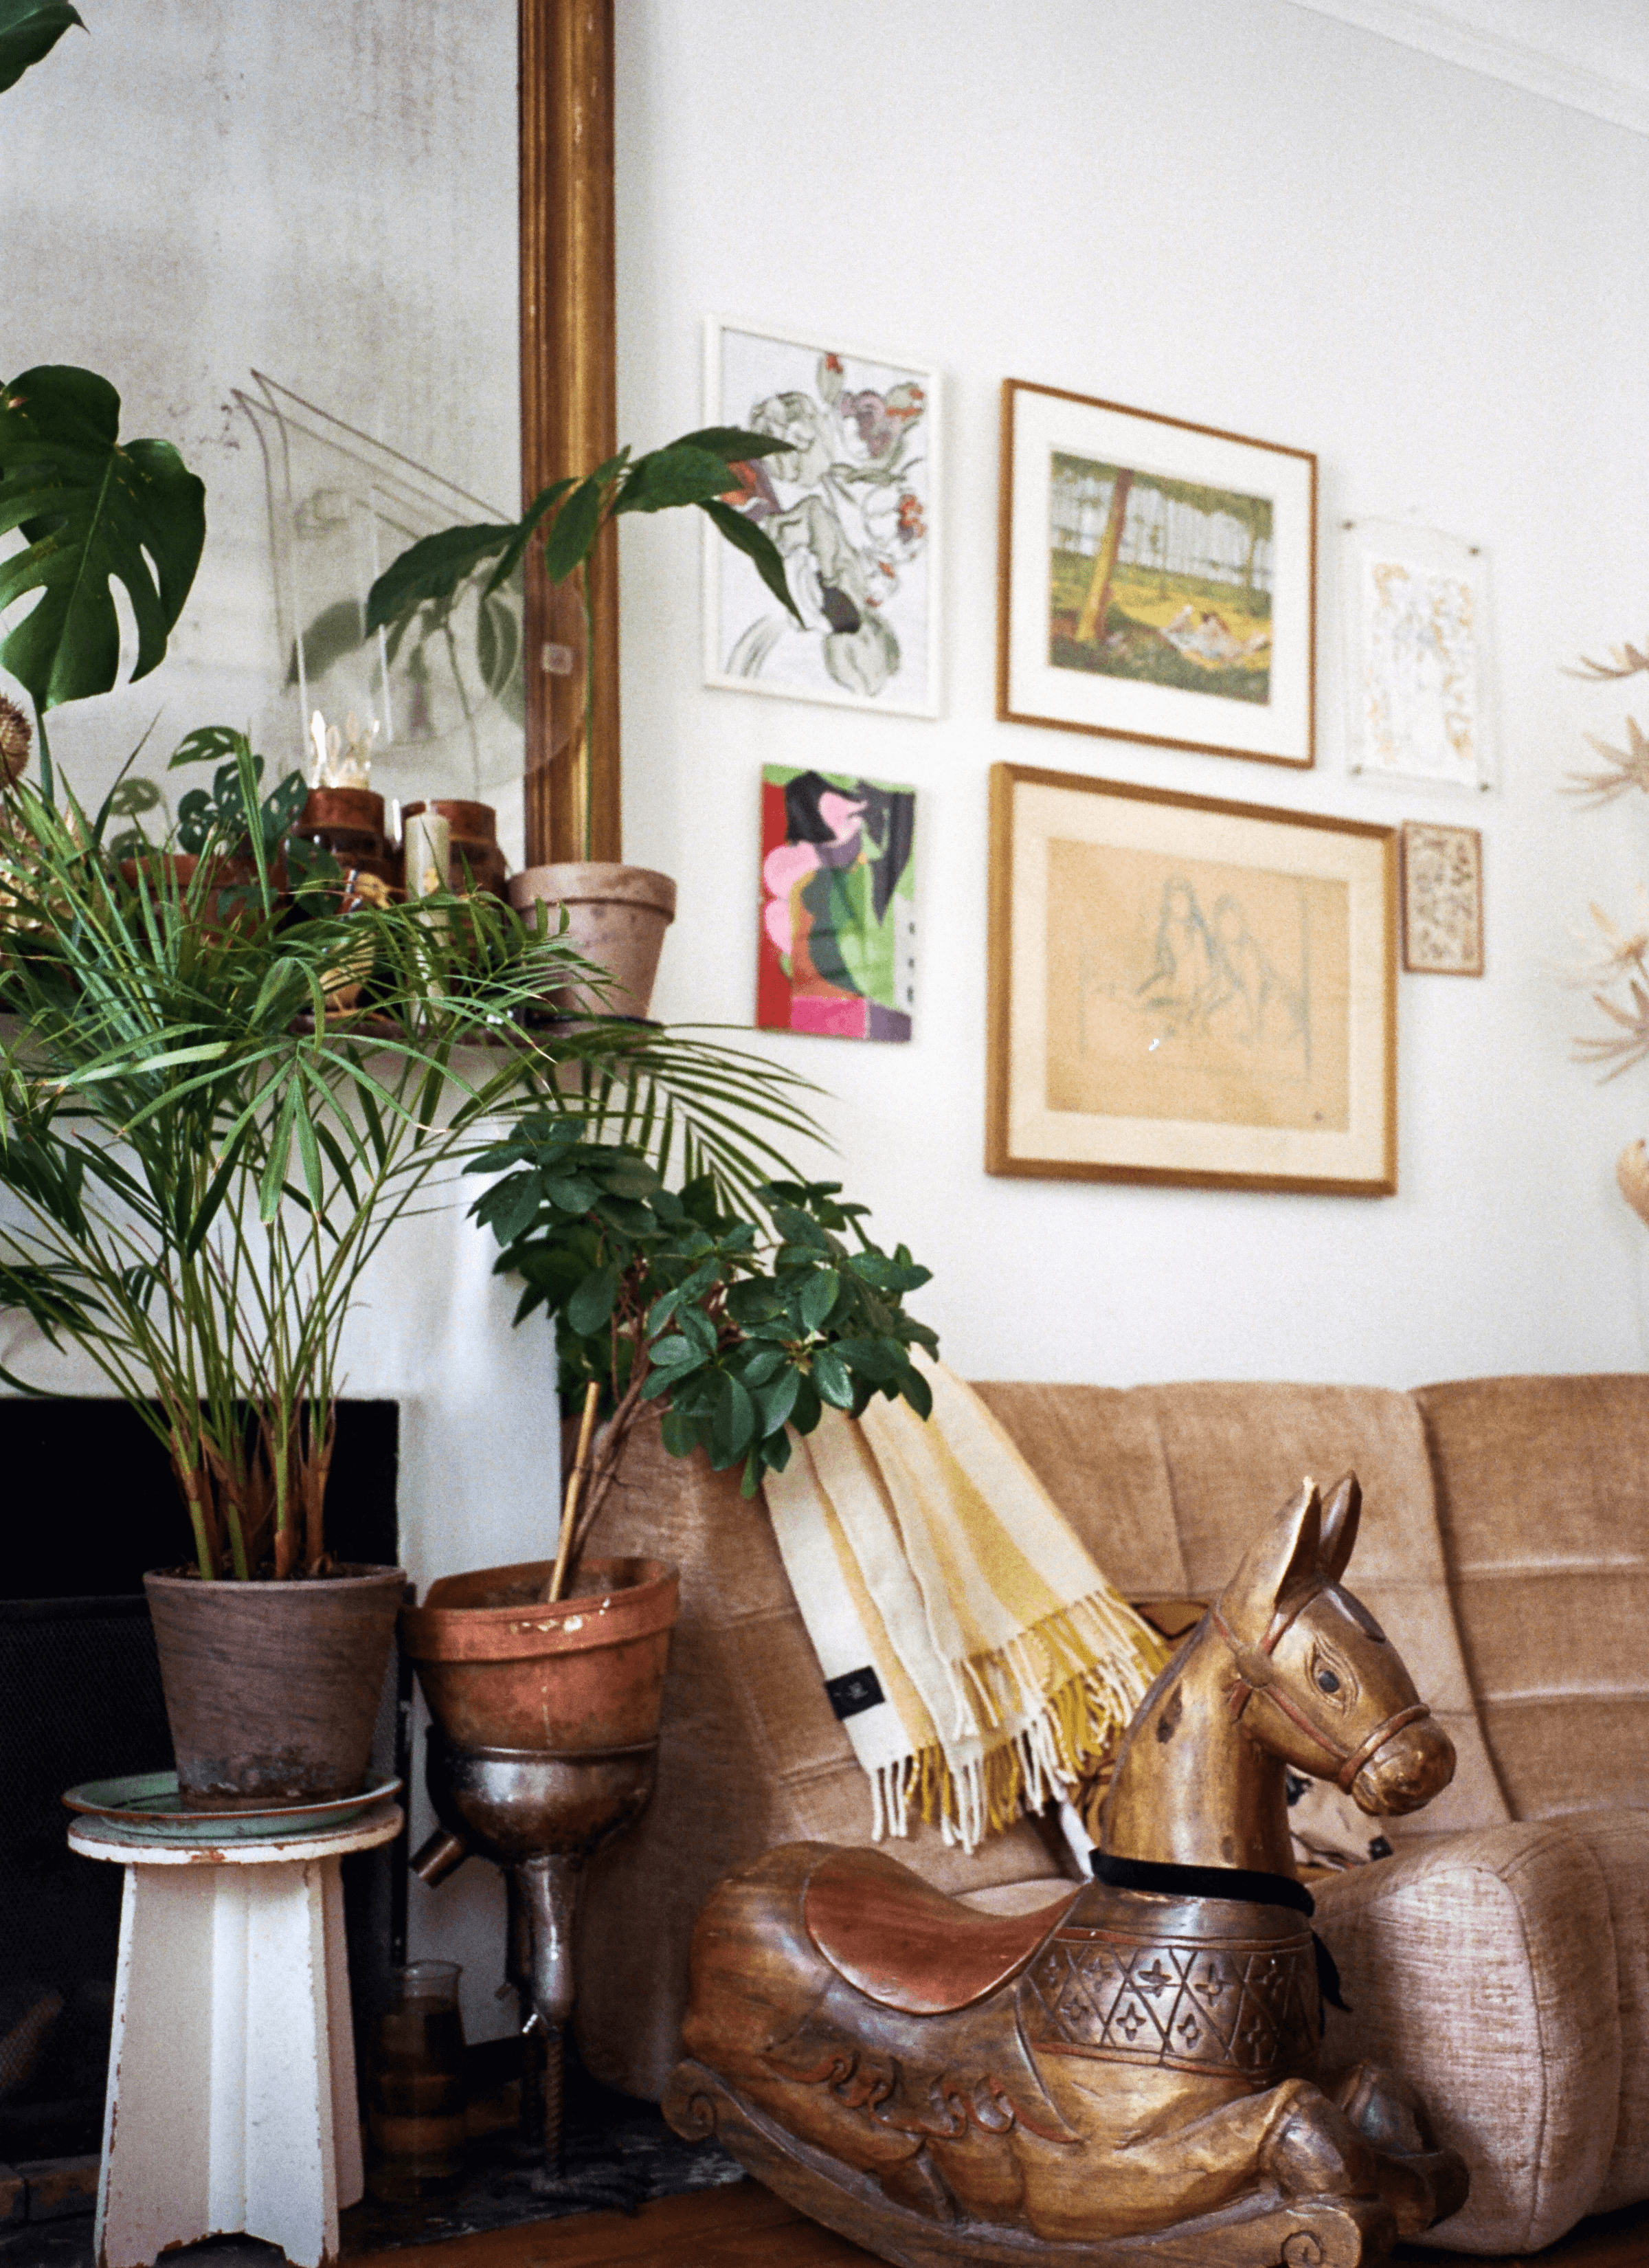 A collection of potted plants decorated the room next to a sofa with a wooden-like horse statue. There are some art and framed pictures being hung on the wall.